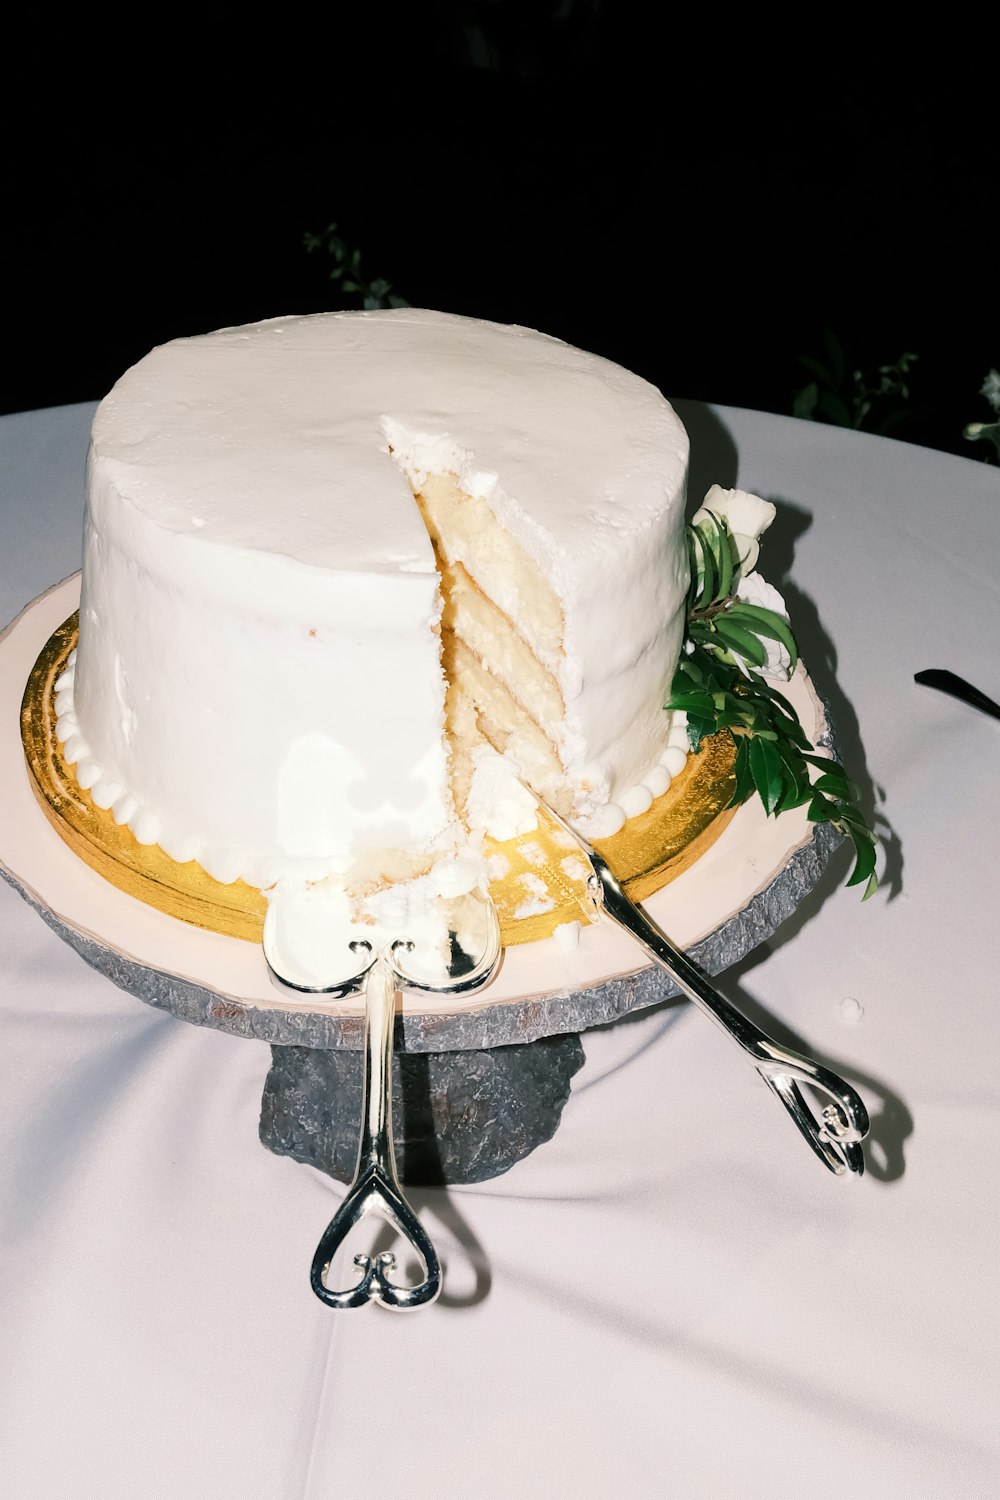 a white cake with a slice cut out of it